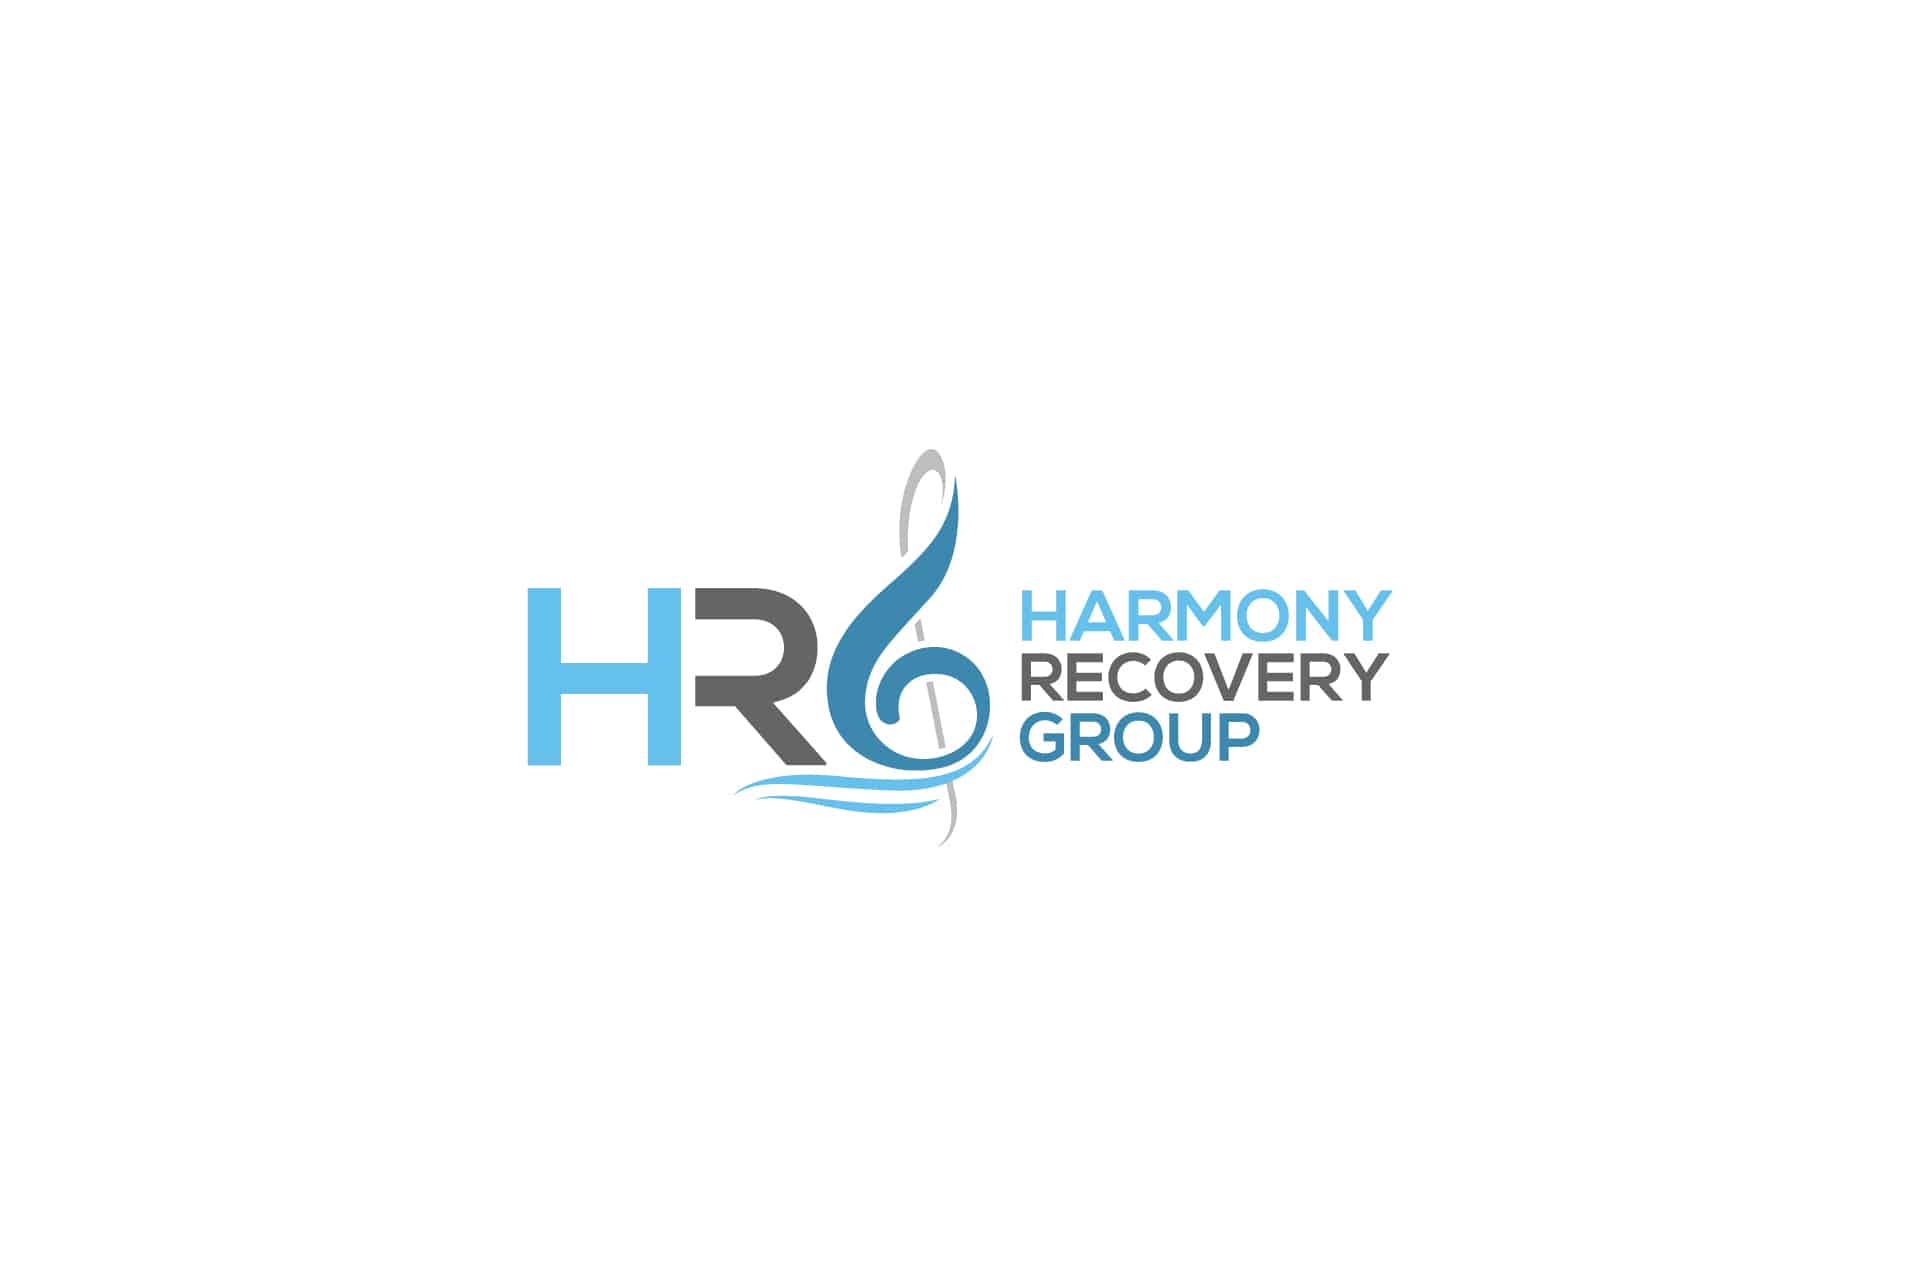 Harmony Recovery Group Announces Acquisition by Thrive Healthcare